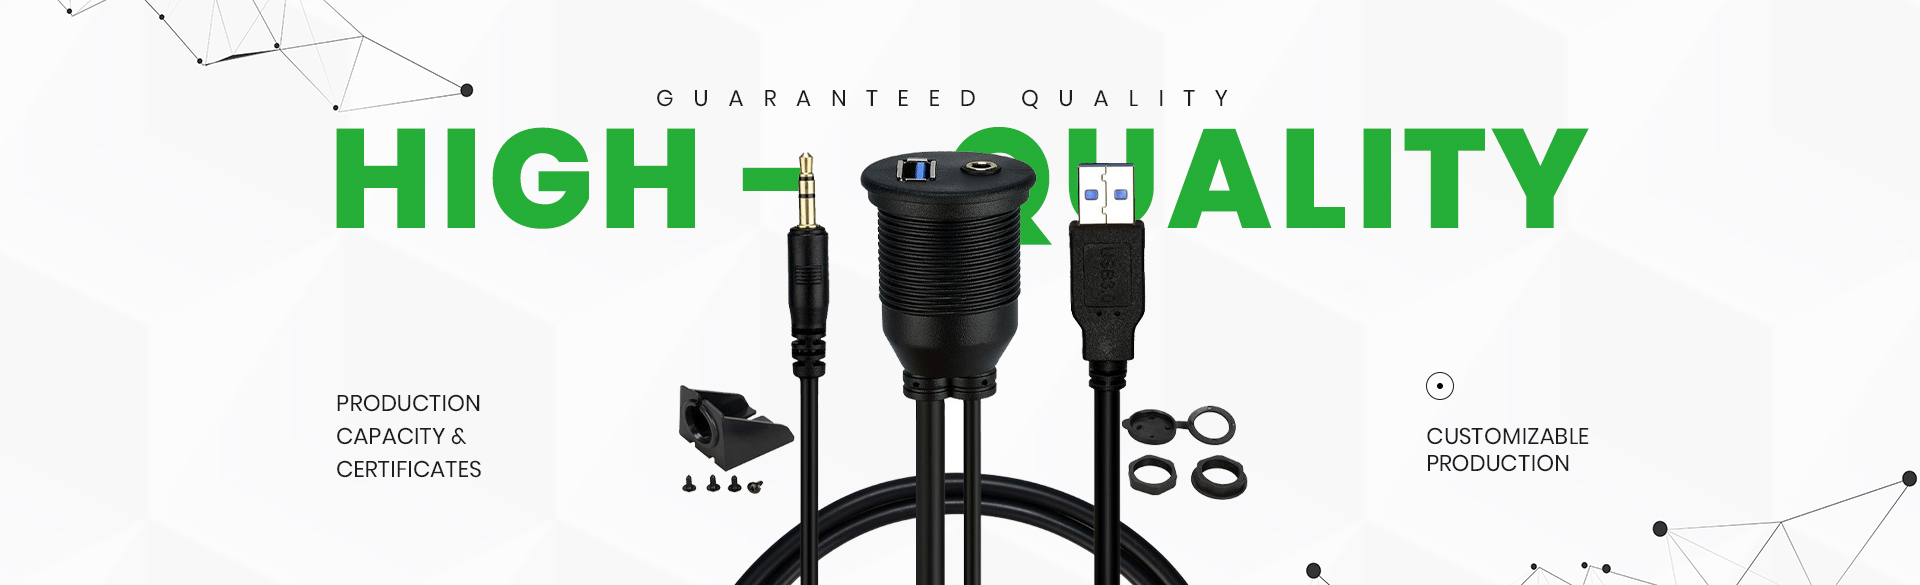 Data Cable, USB Cable, Audio Cable - LBT